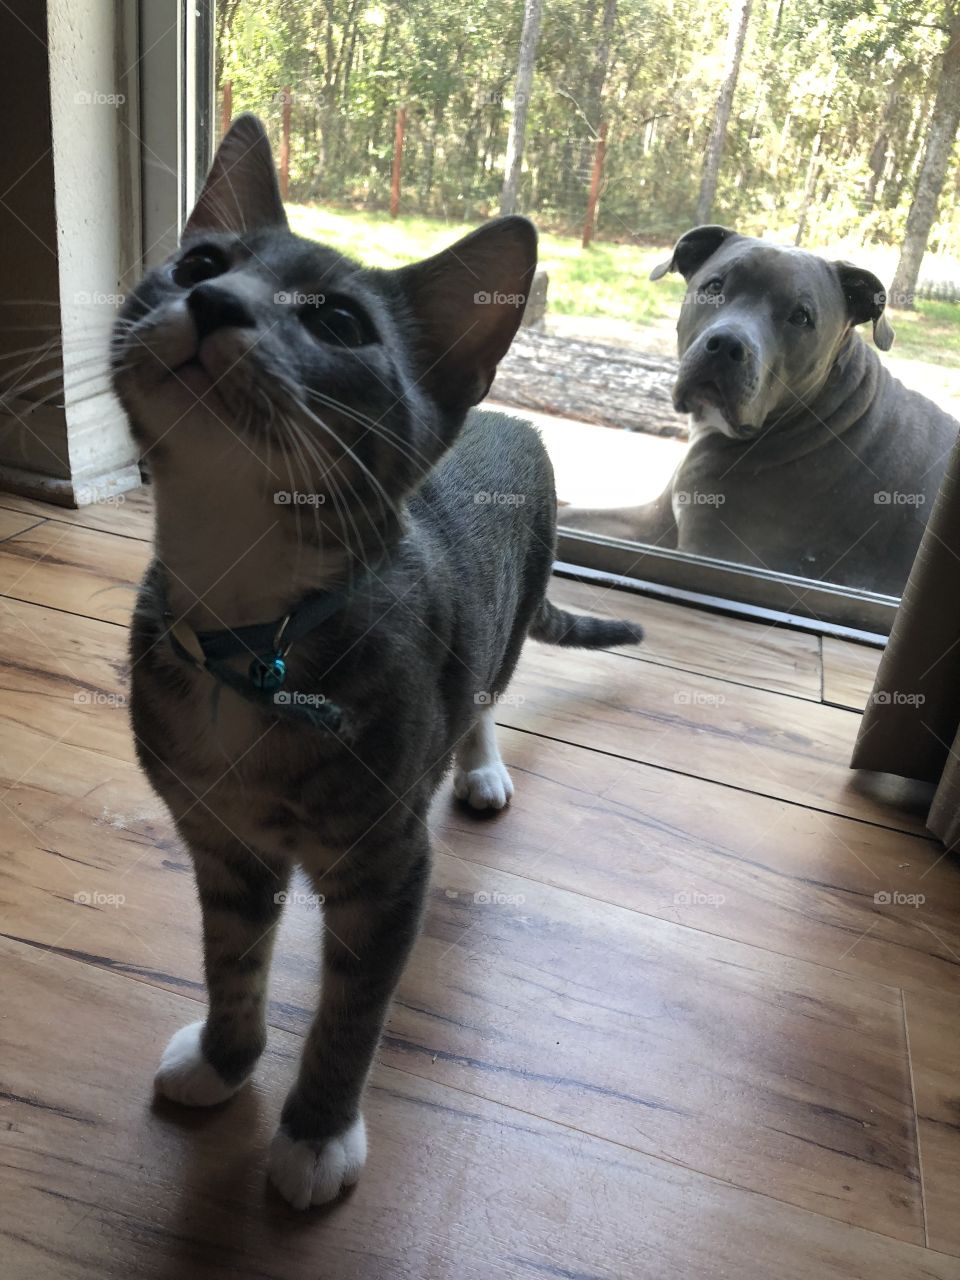 Romeo the kitten and Blue the dog just hanging out on a Tuesday afternoon inside and out loving through the glass door